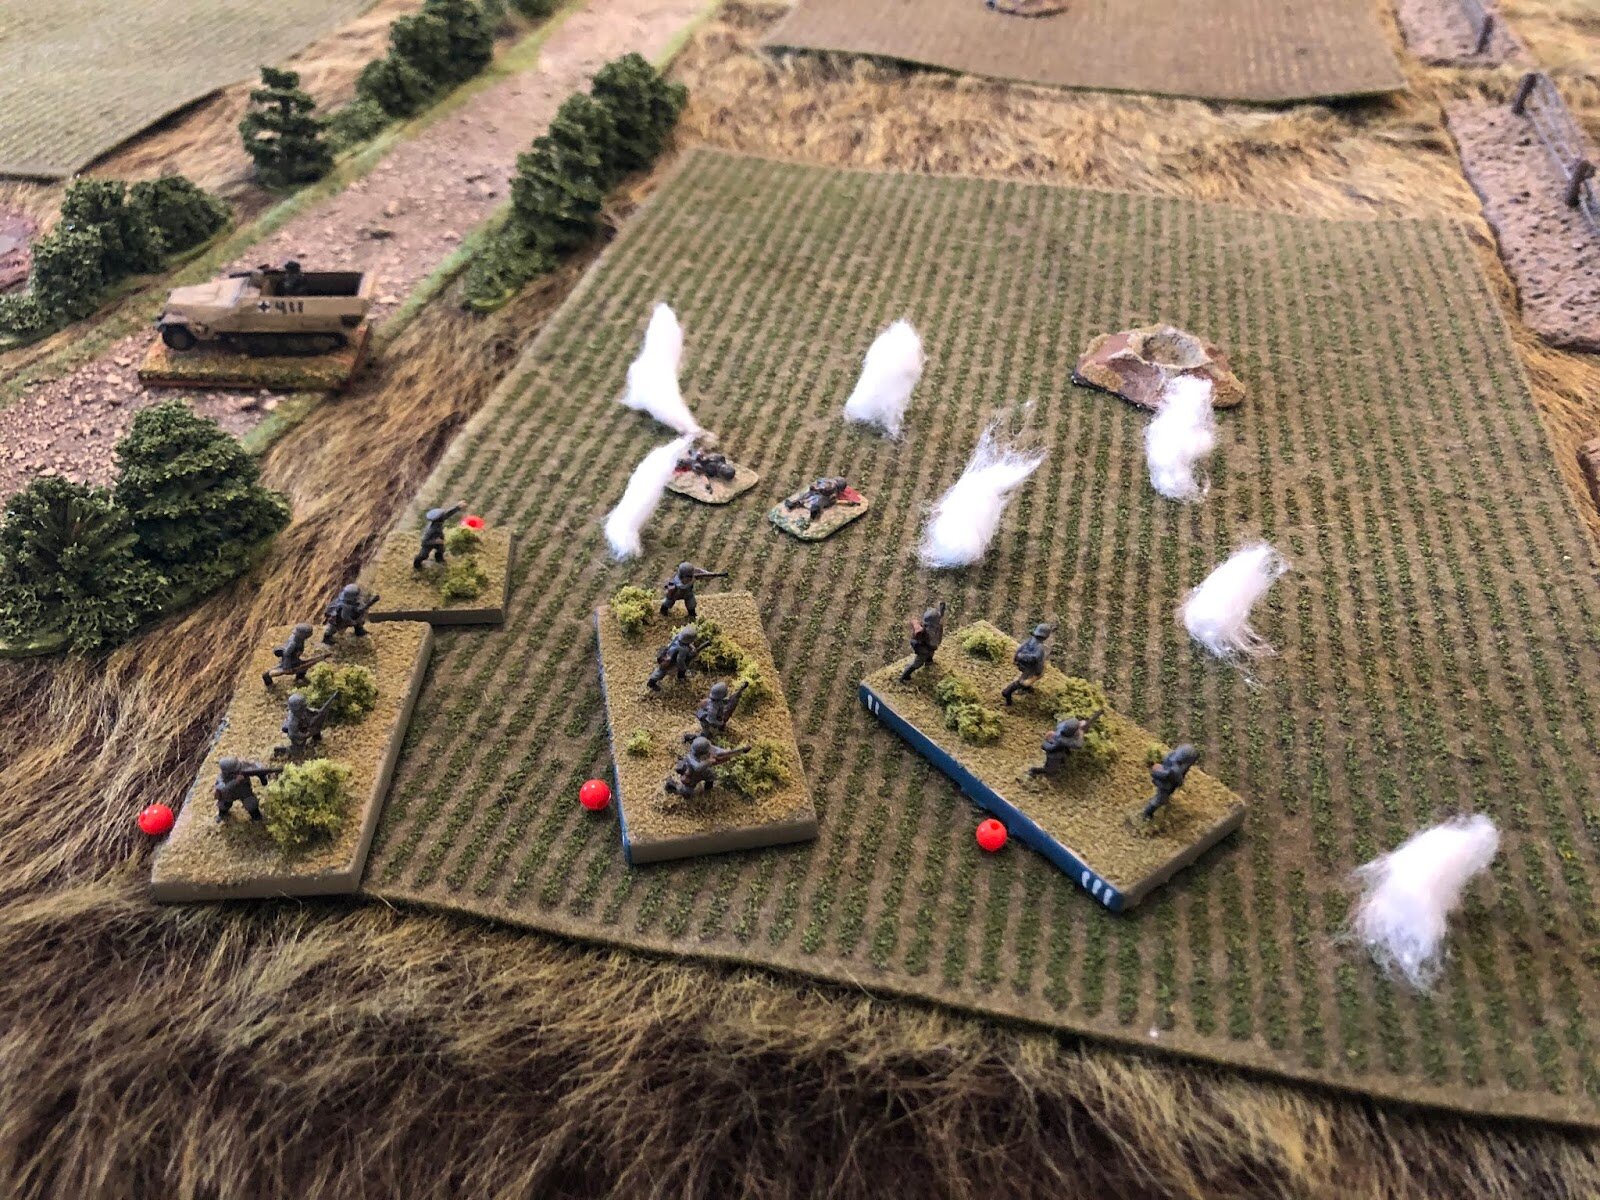  As 1st and 3rd Platoons continue to be pounded mercilessly by the Soviet mortars. 